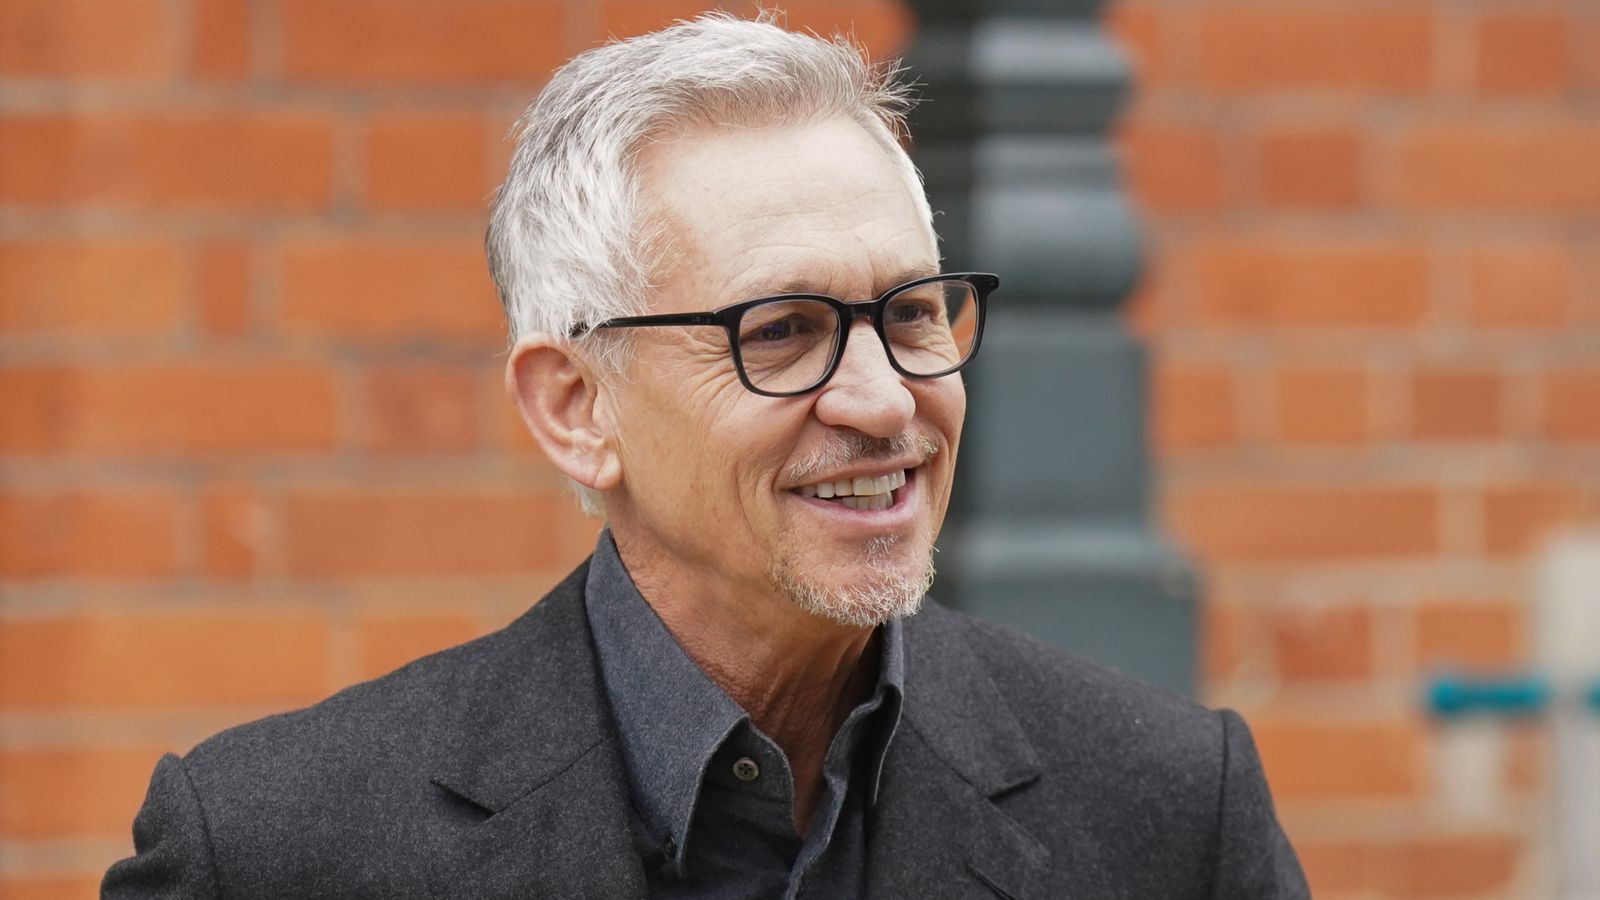 Gary Lineker 'delighted' to return as BBC reviews social media rules